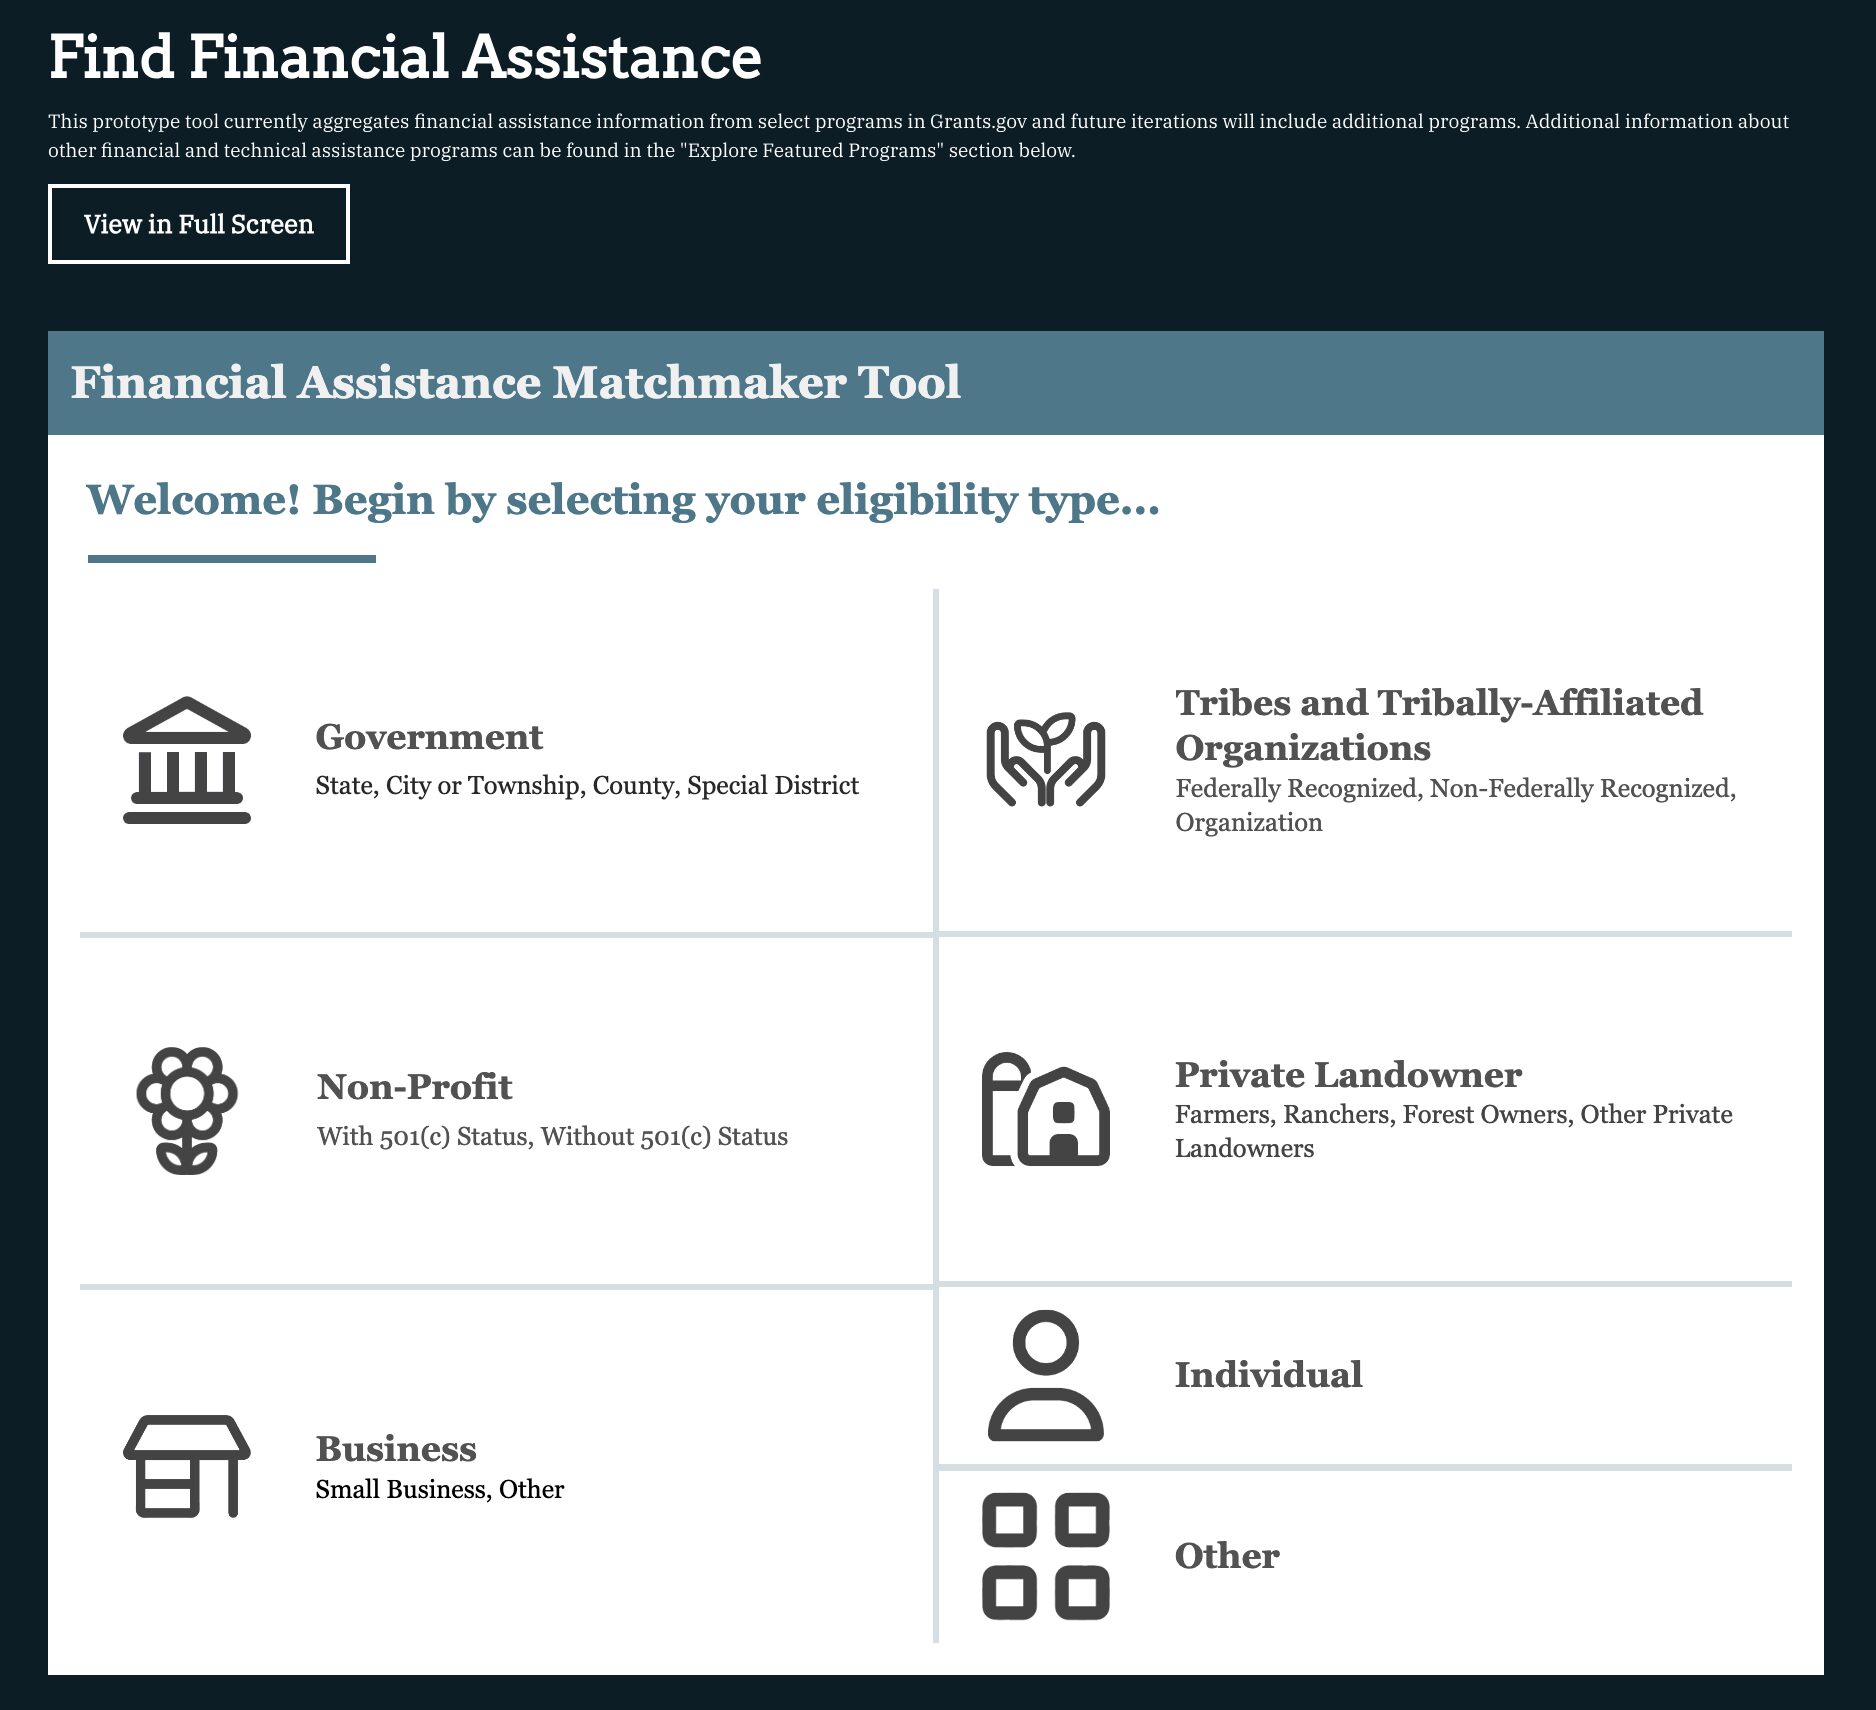 Image of prototype tool that currently aggregates financial assistance information from select programs in Grants.gov that Blue Raster was involved in building. 